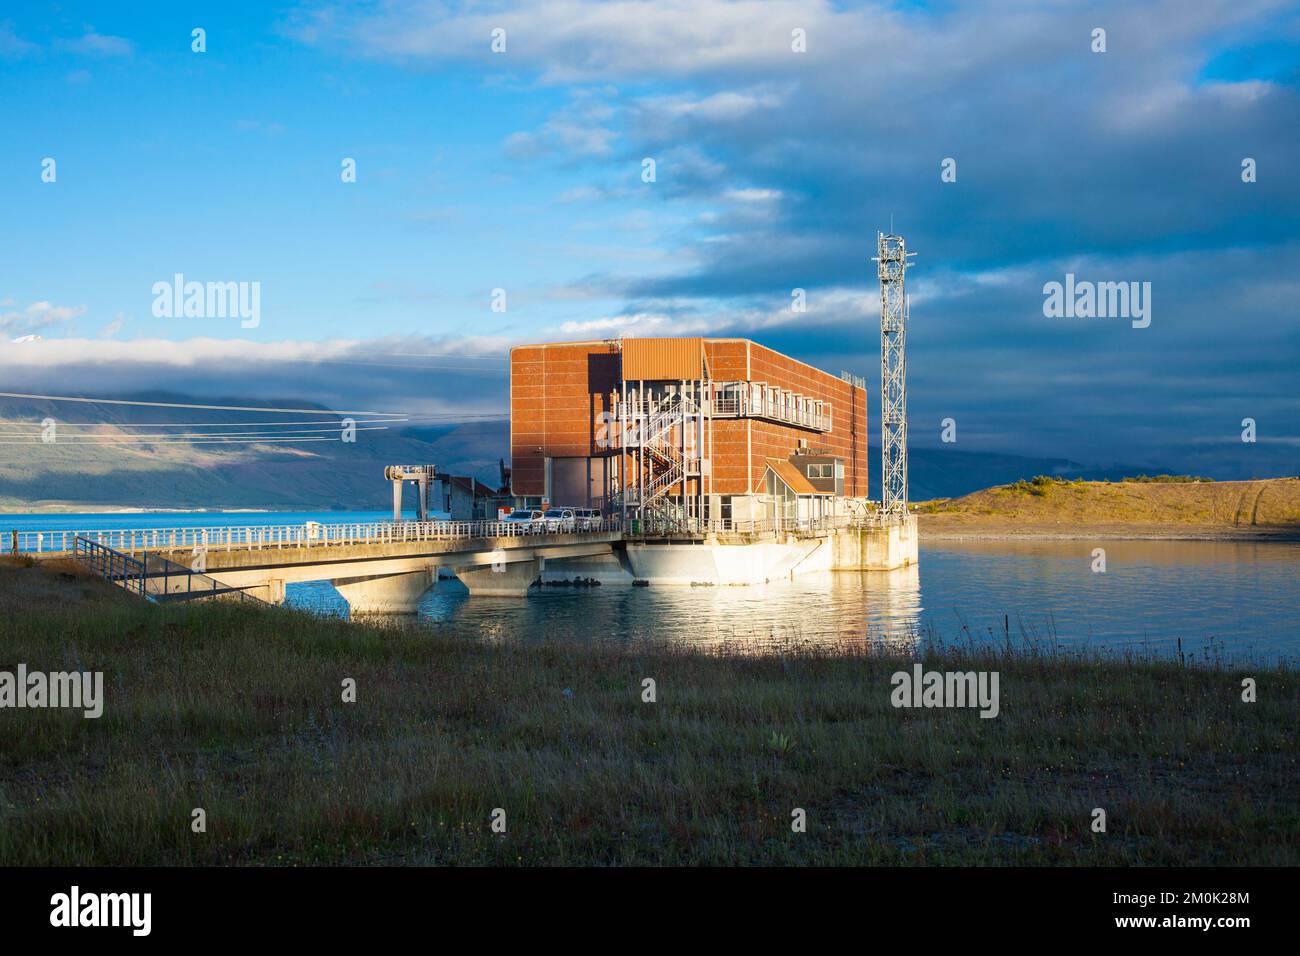 A Look at life in New Zealand: Hydro-electric Power generation at the Tekapo B Power Station on the shores of Lake Pukaki, Twizel, South Island. Stock Photo